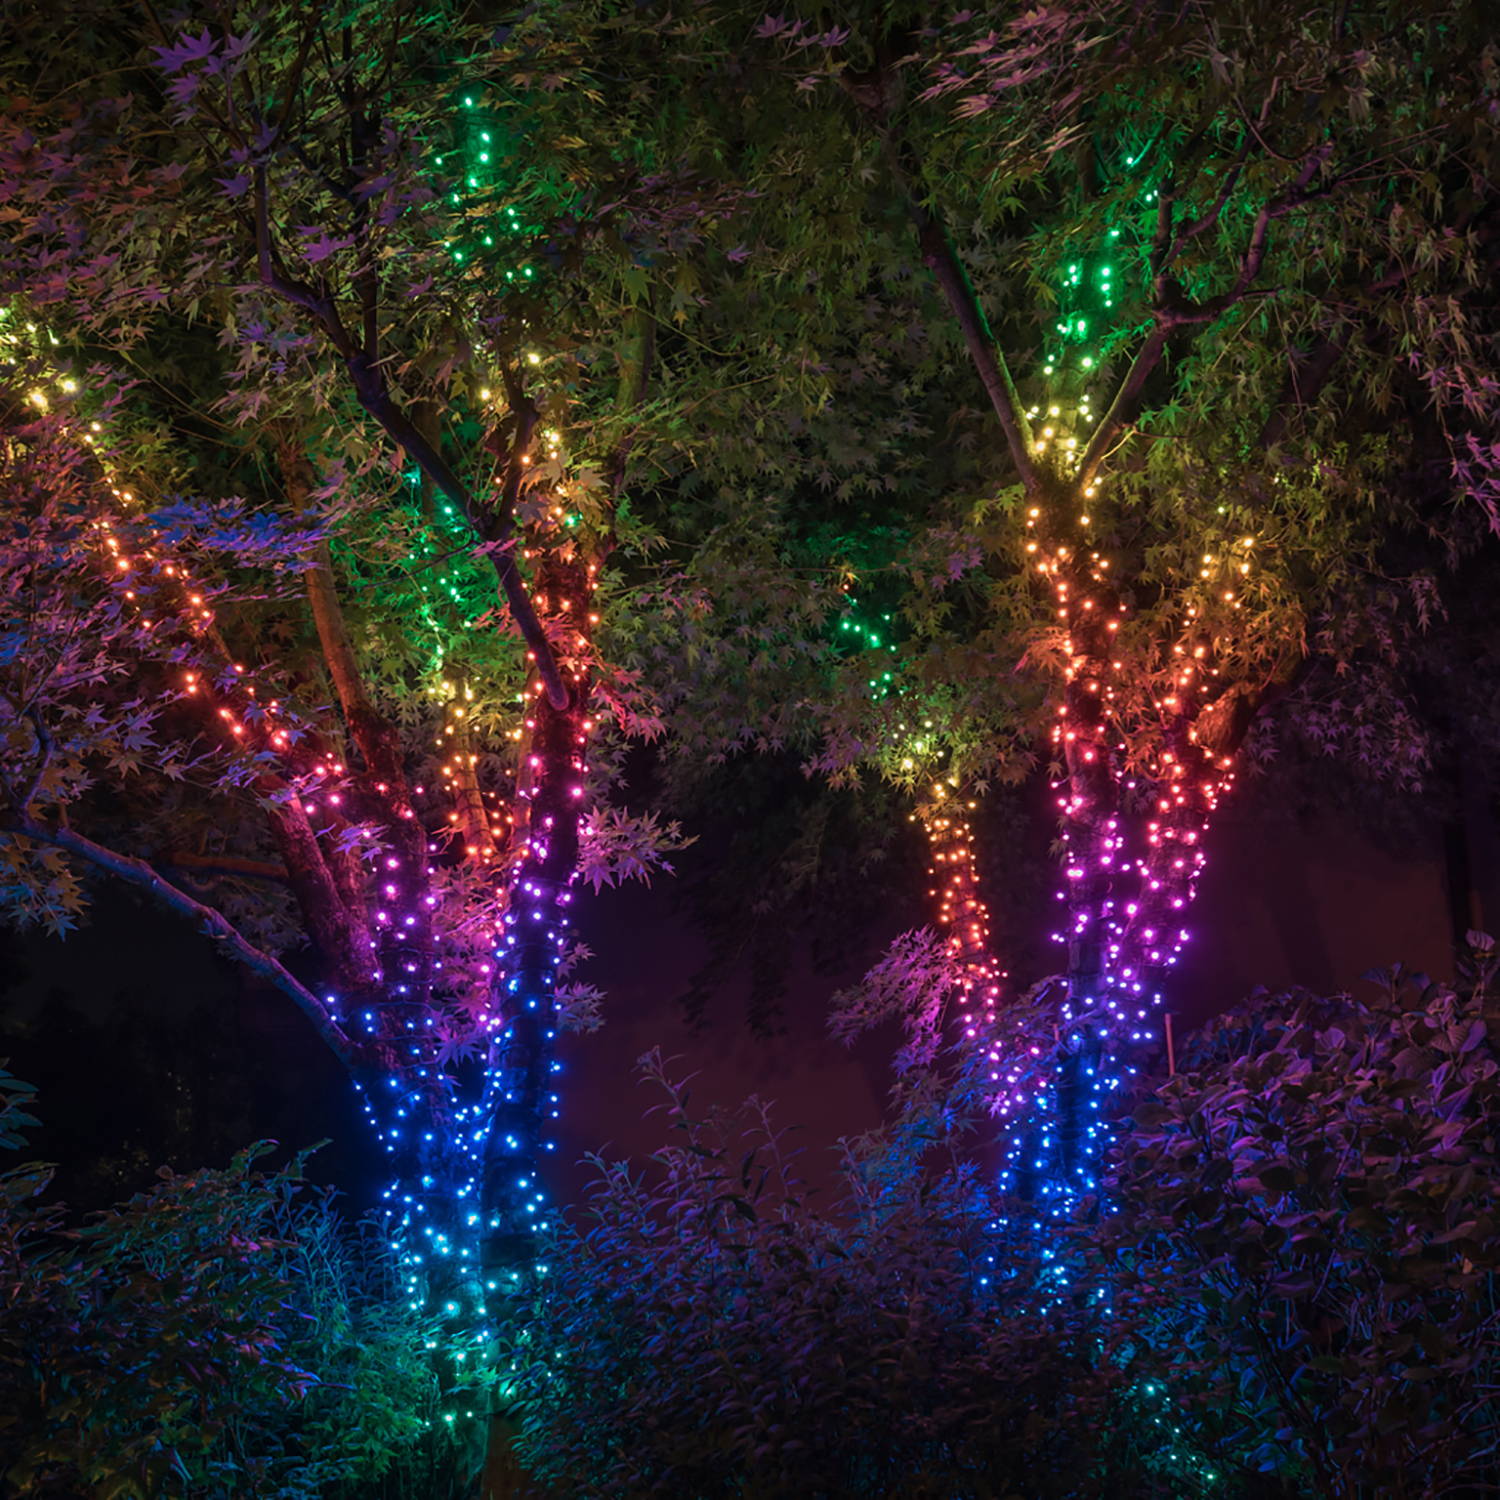 Multi coloured Twinkly string lighting wrapped around trees